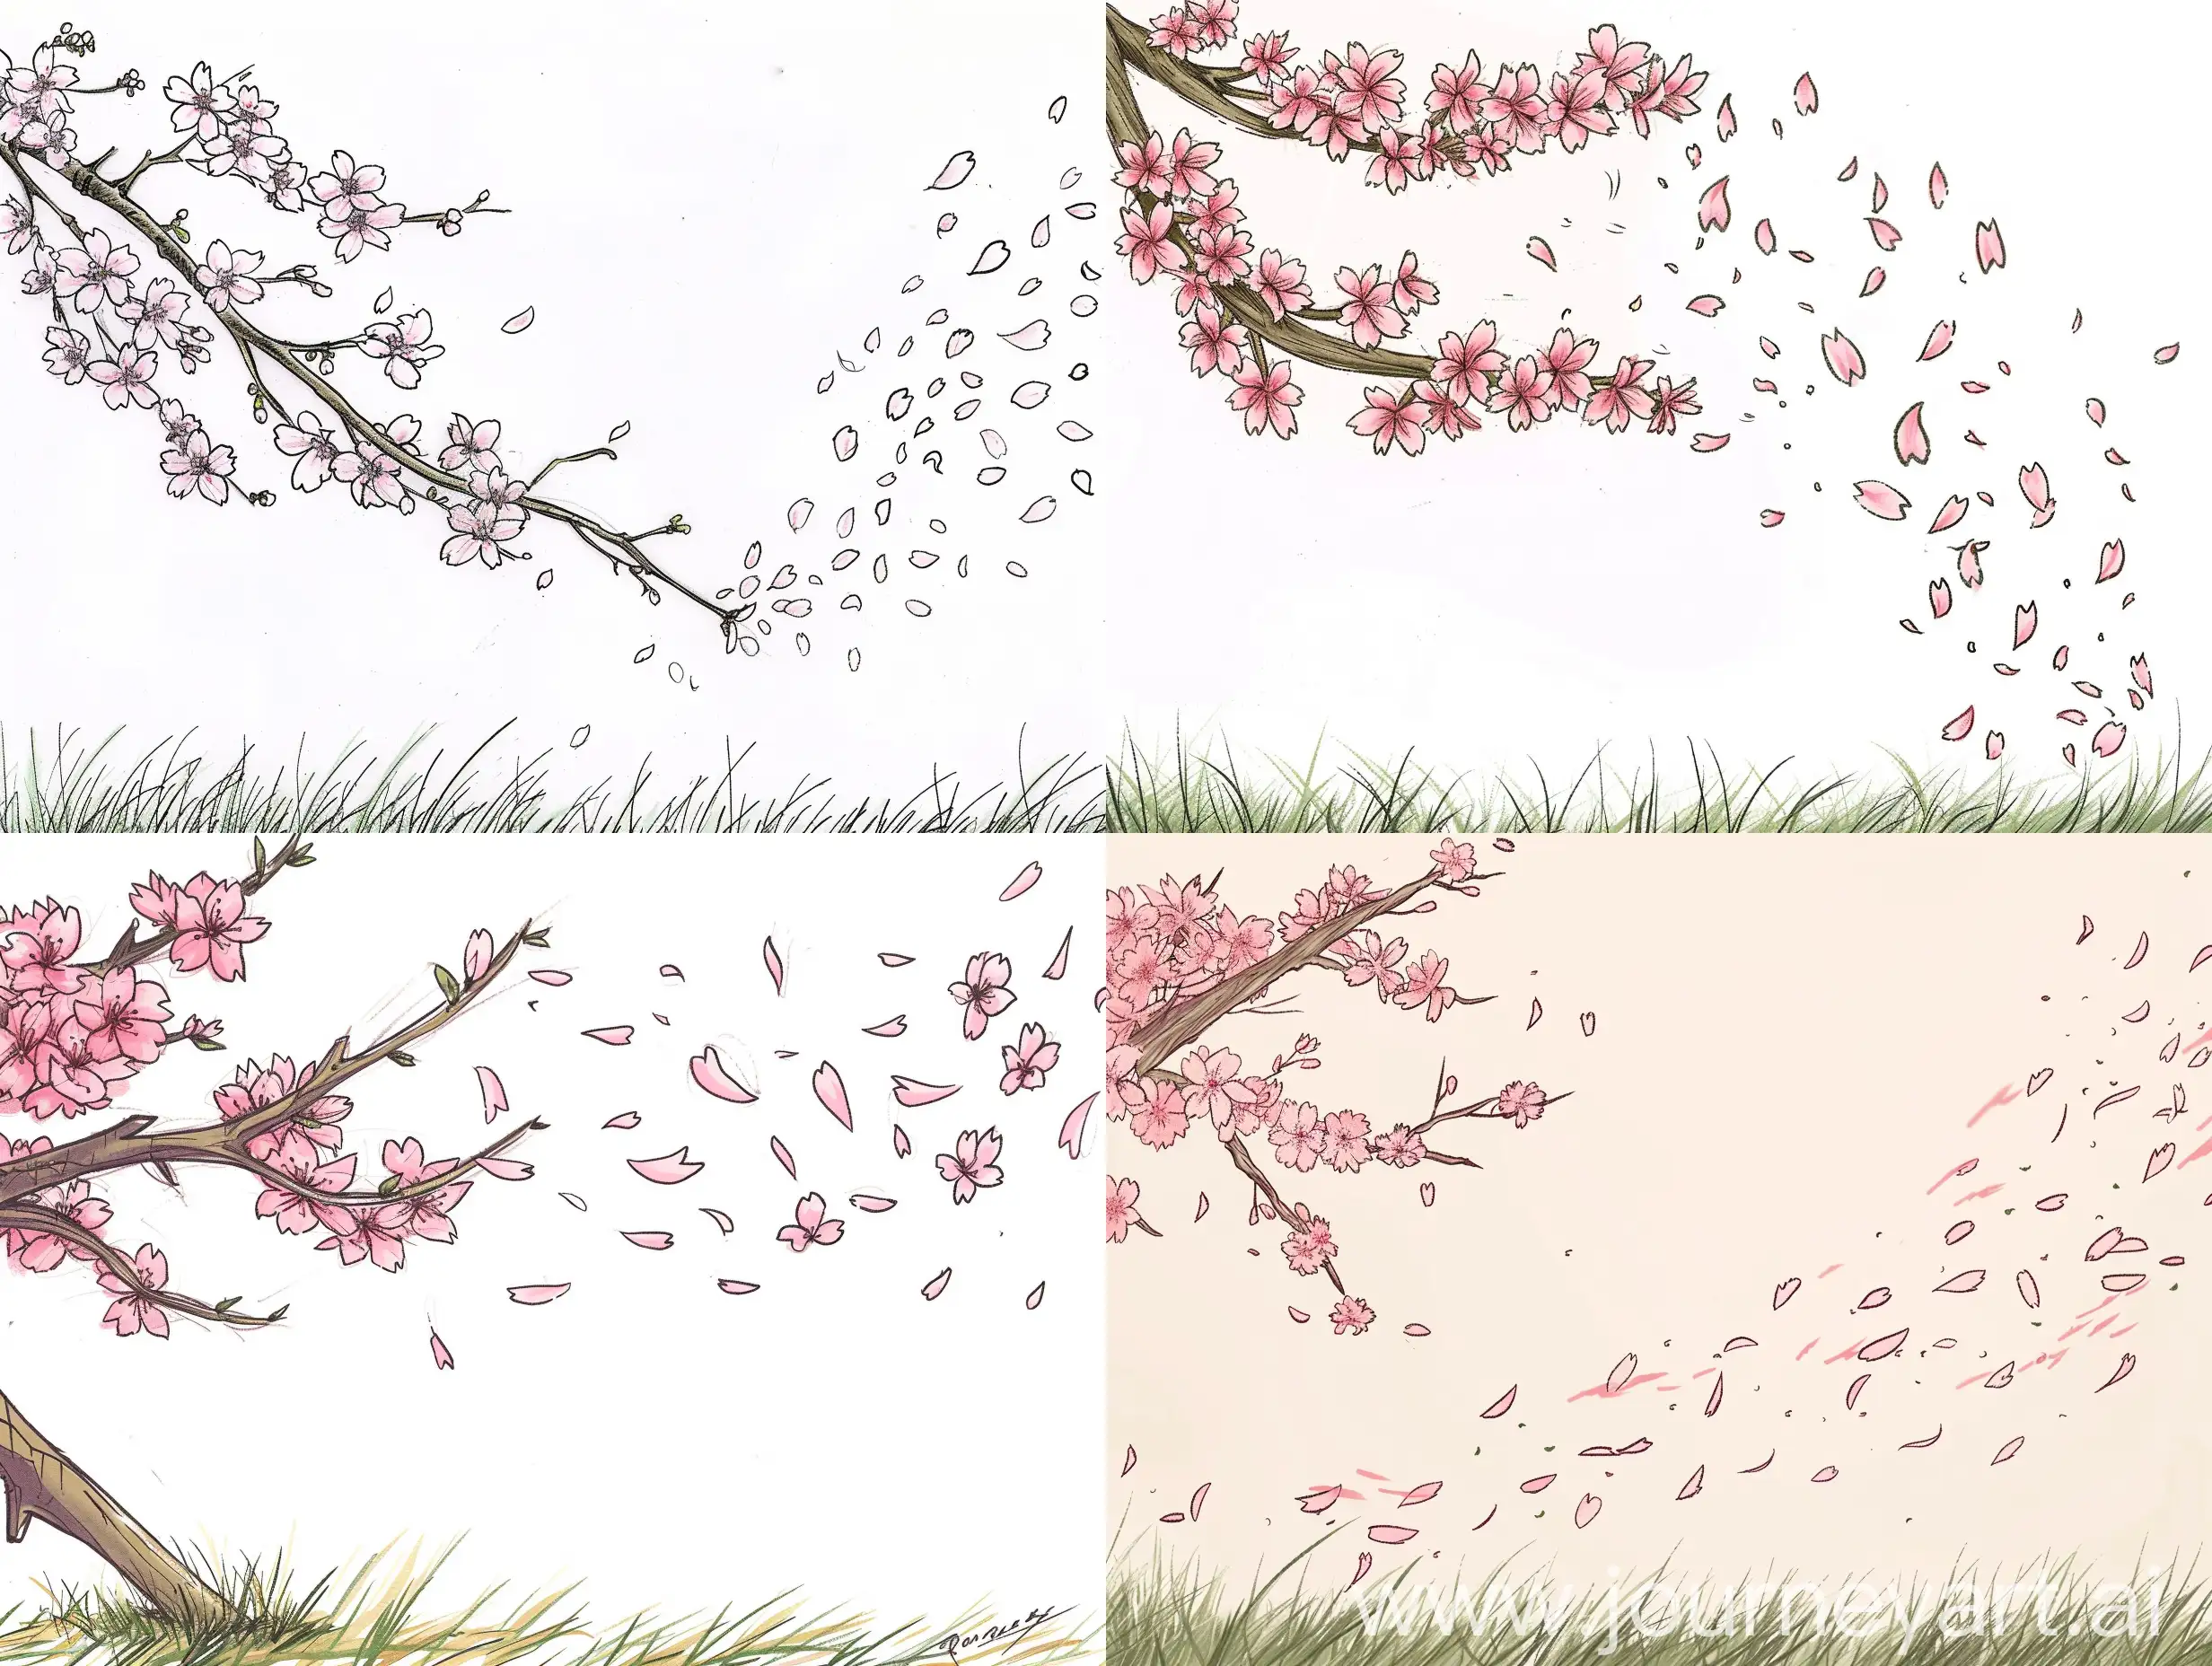 I want a colored sketch of a thick branch of cherry blossoms coming out of the top left side of the sketch and a lot of petals flying in the wind, diagonally right away from the branch. And a mid sized branch. With some grass on the bottom of the sketch. 